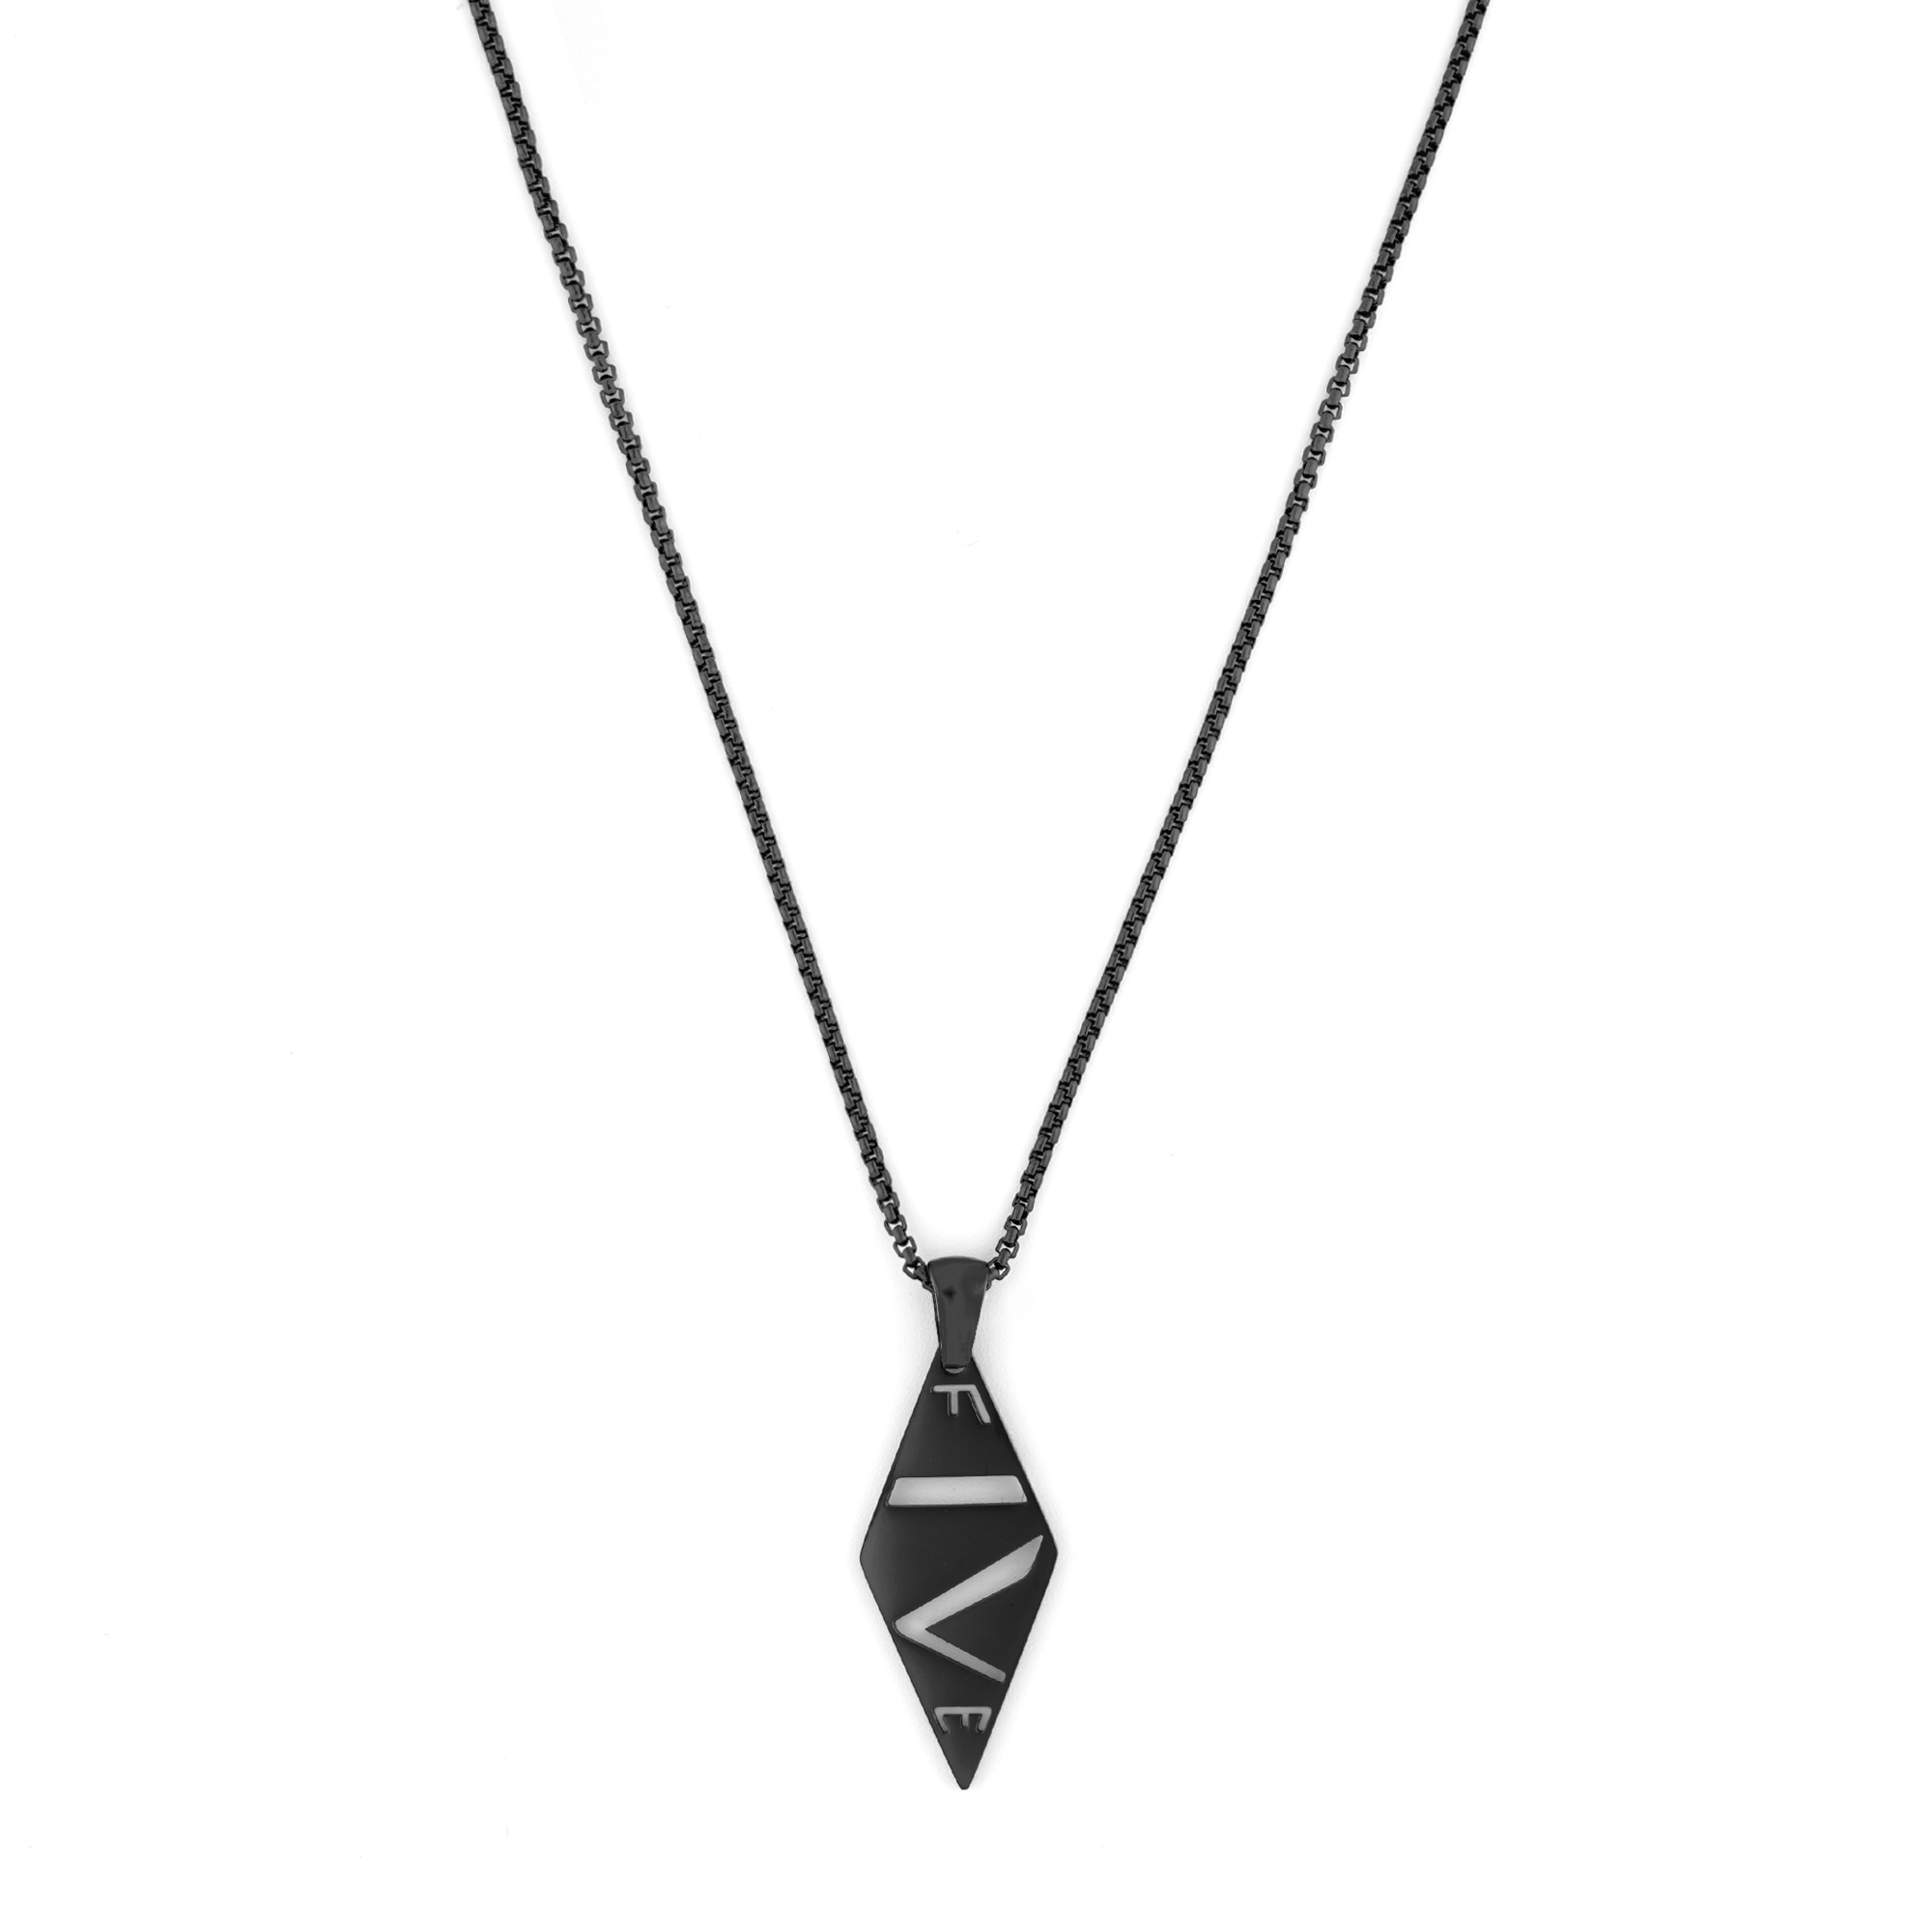 Nako men's necklace by Five Jwlry in black, featuring a 1.5mm round box chain paired with the brand's lozenge-shaped signature Five pendant. Available in sizes 50cm or 55cm. Crafted from water-resistant 316L stainless steel. Hypoallergenic with a 2-year warranty.